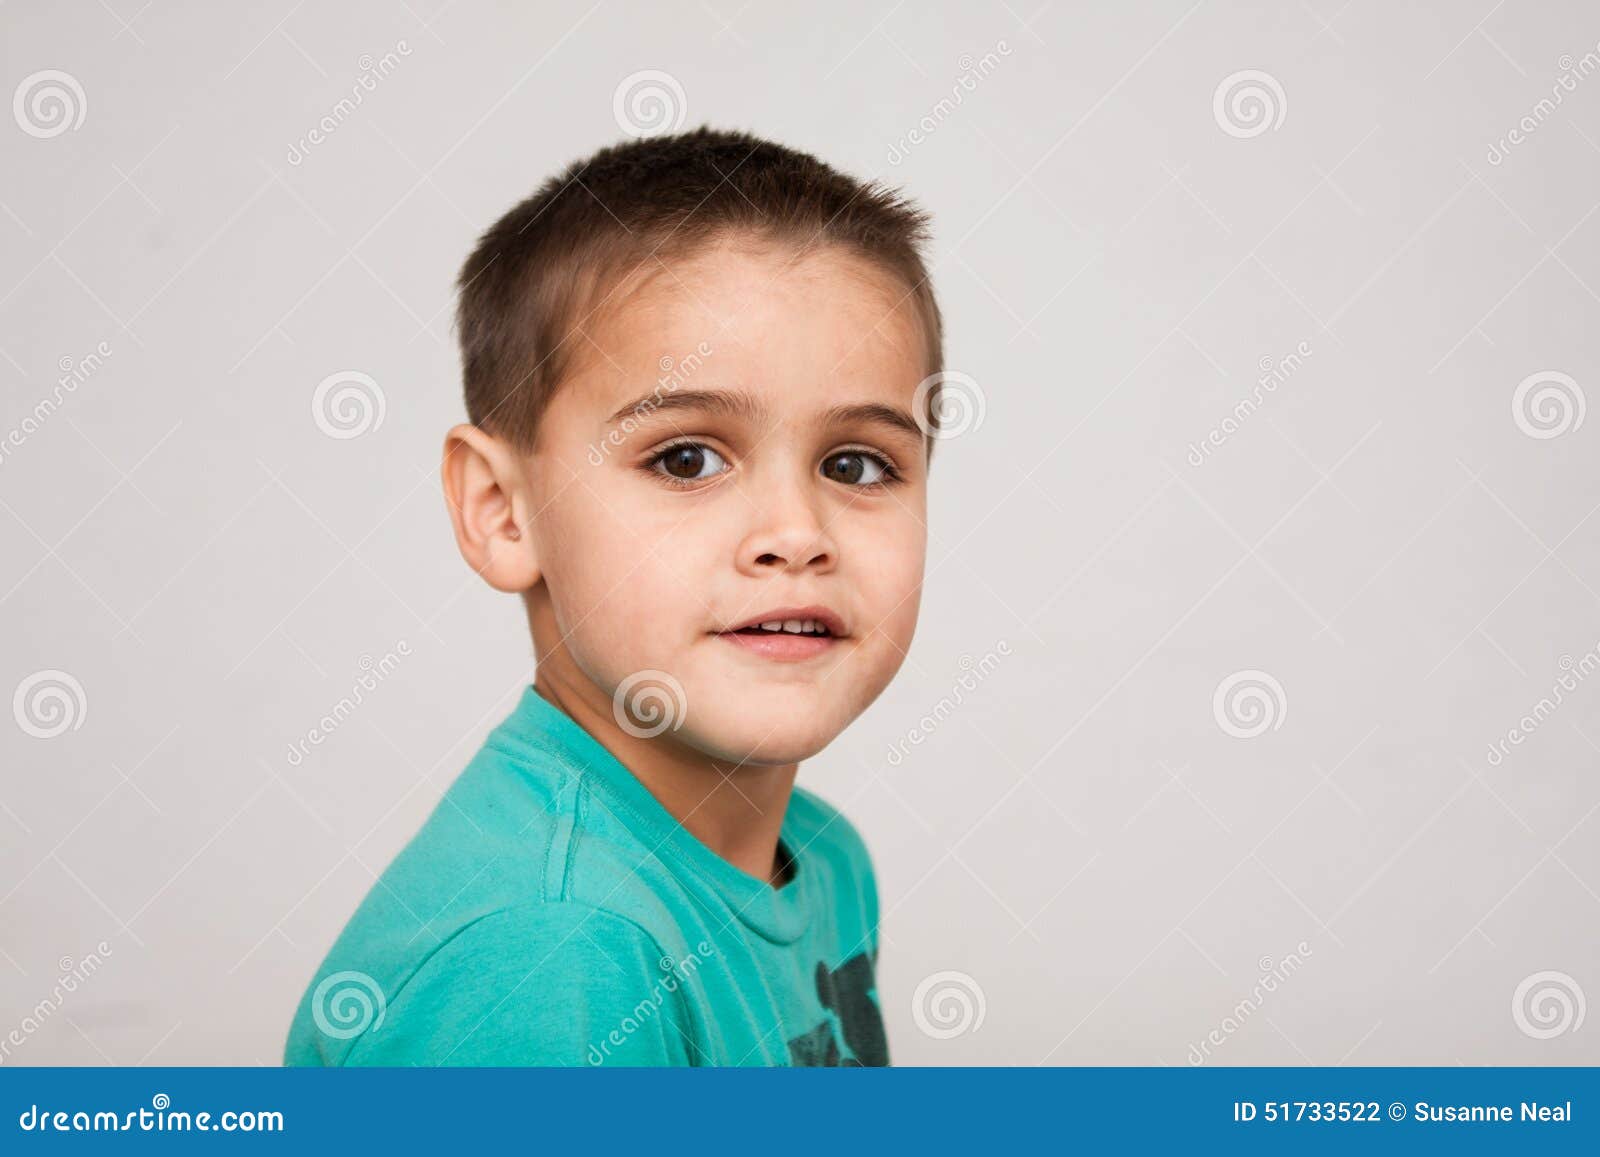 Portrait Of Cute Four Year Old Boy With Short Haircut Stock